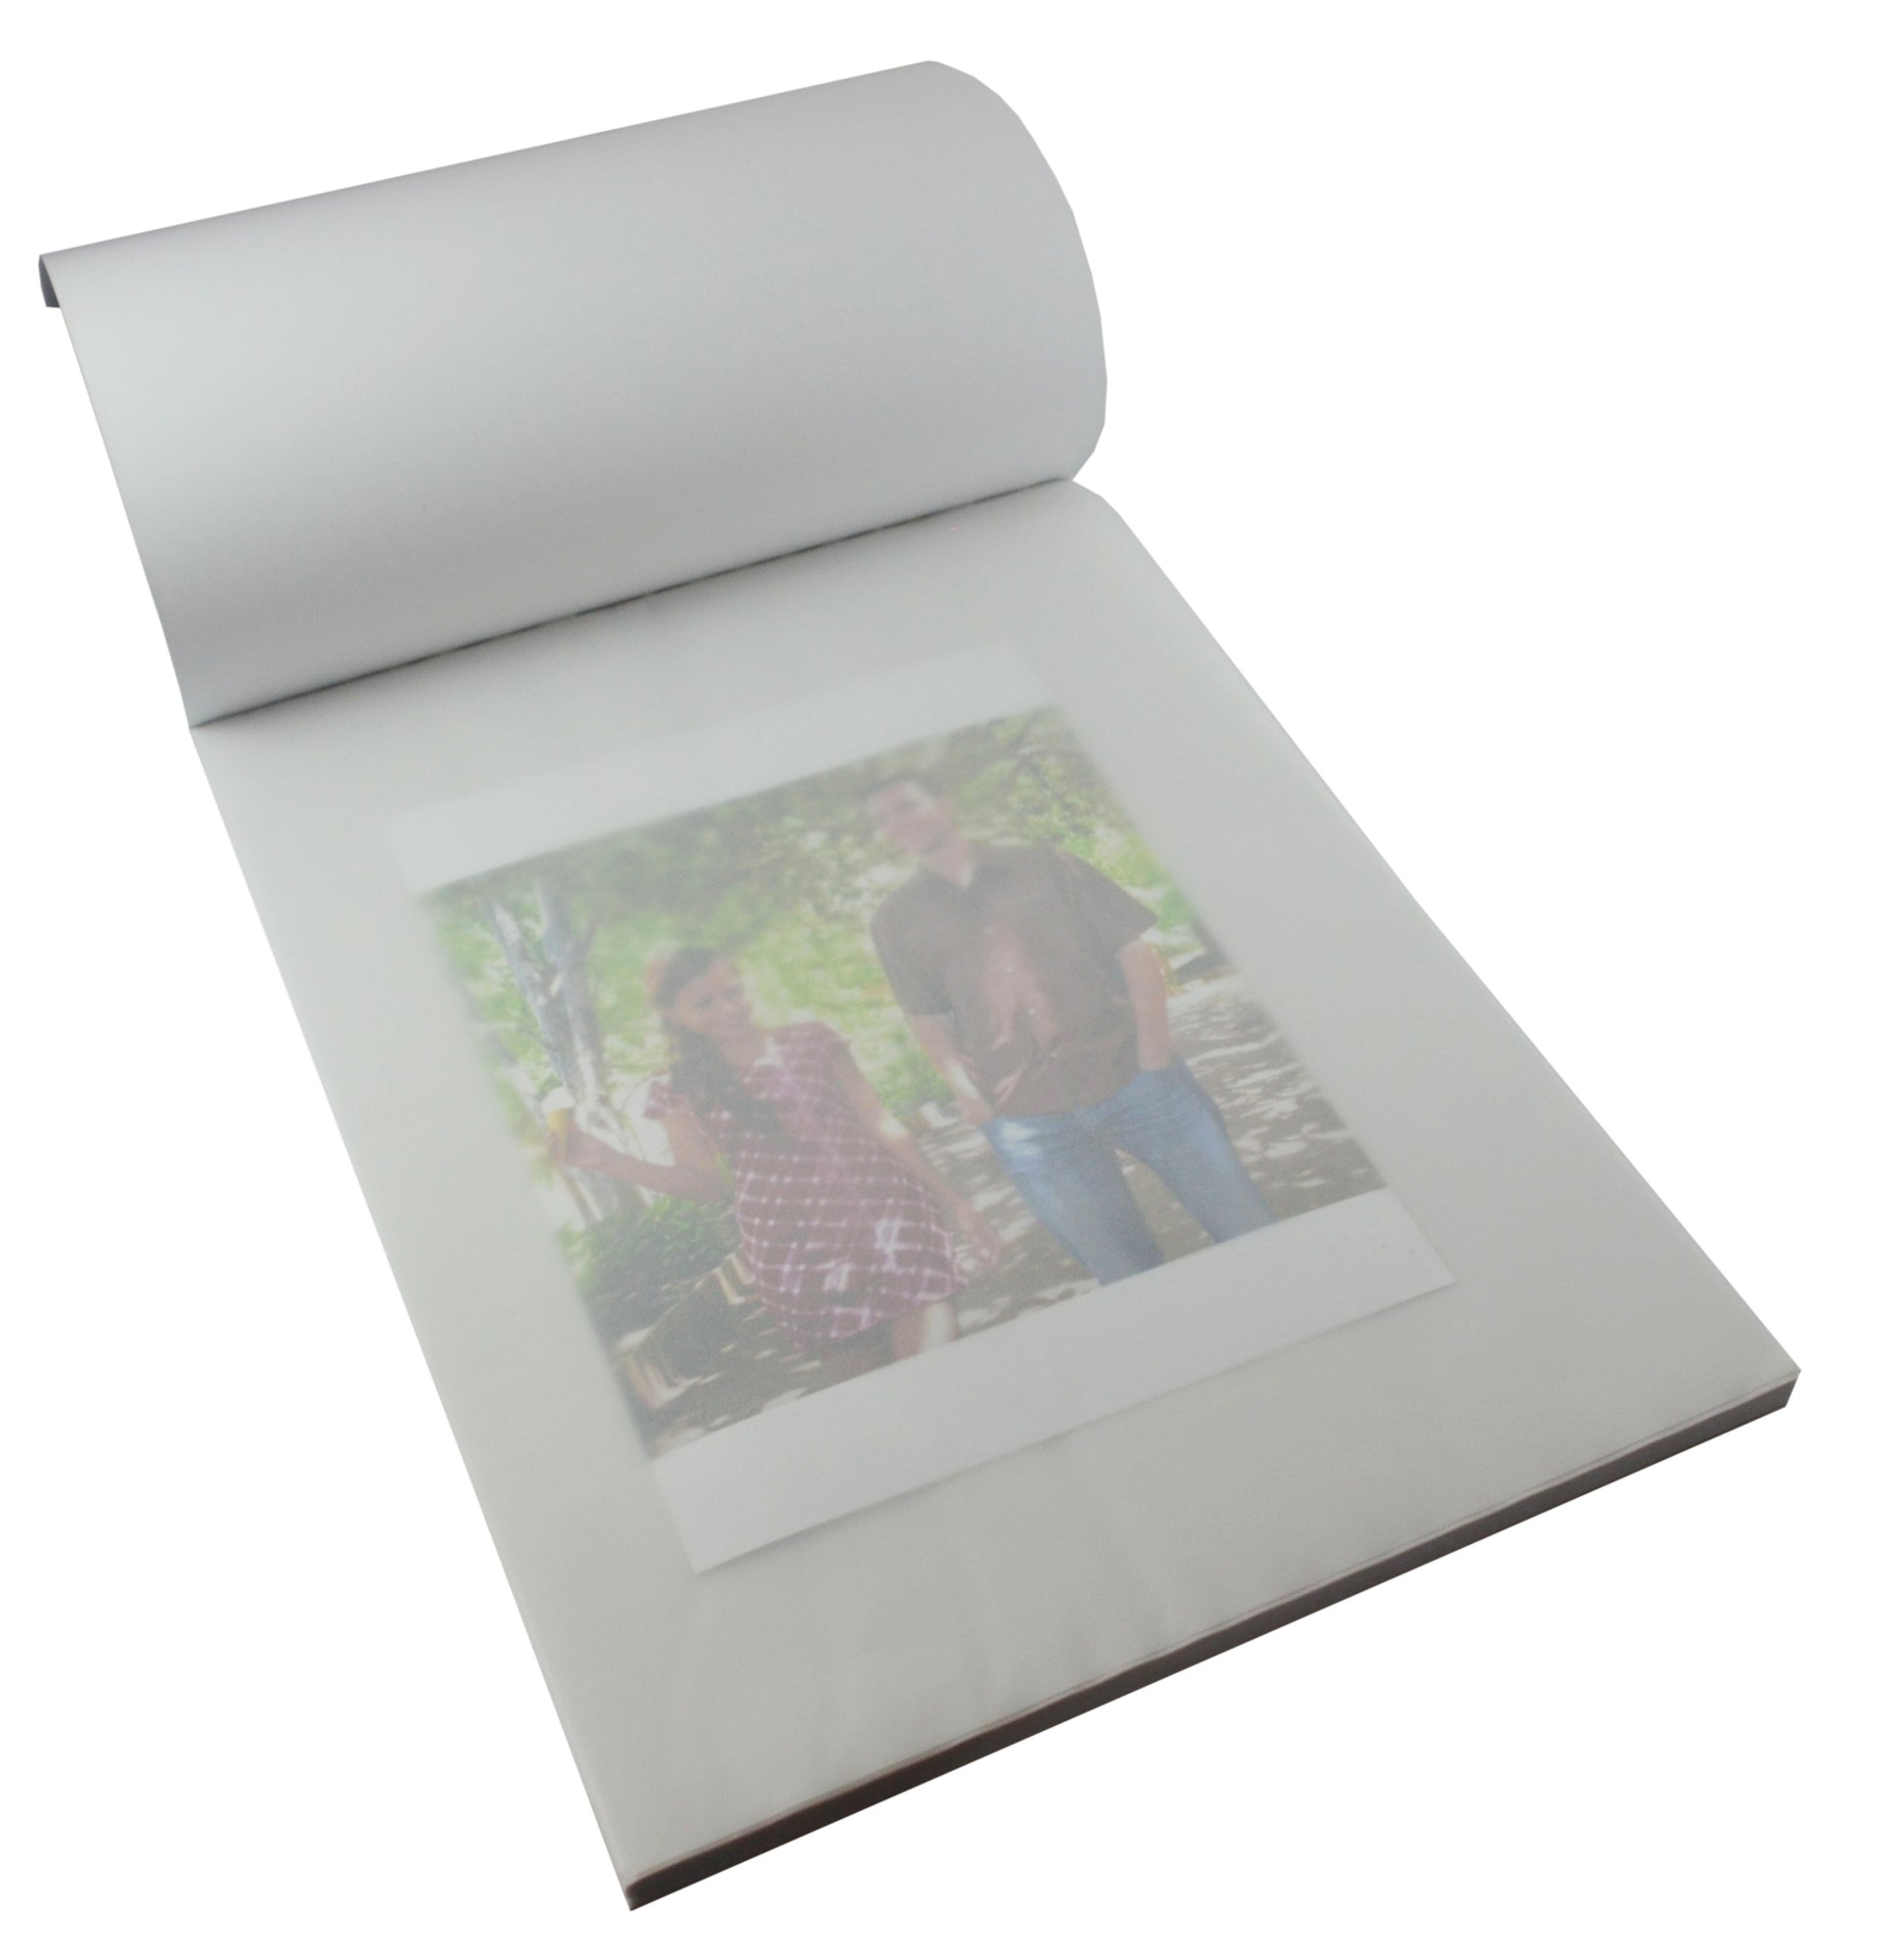 100Sheets Tracing Paper 8.27 x 11.69 inch 73g Artists White Trace